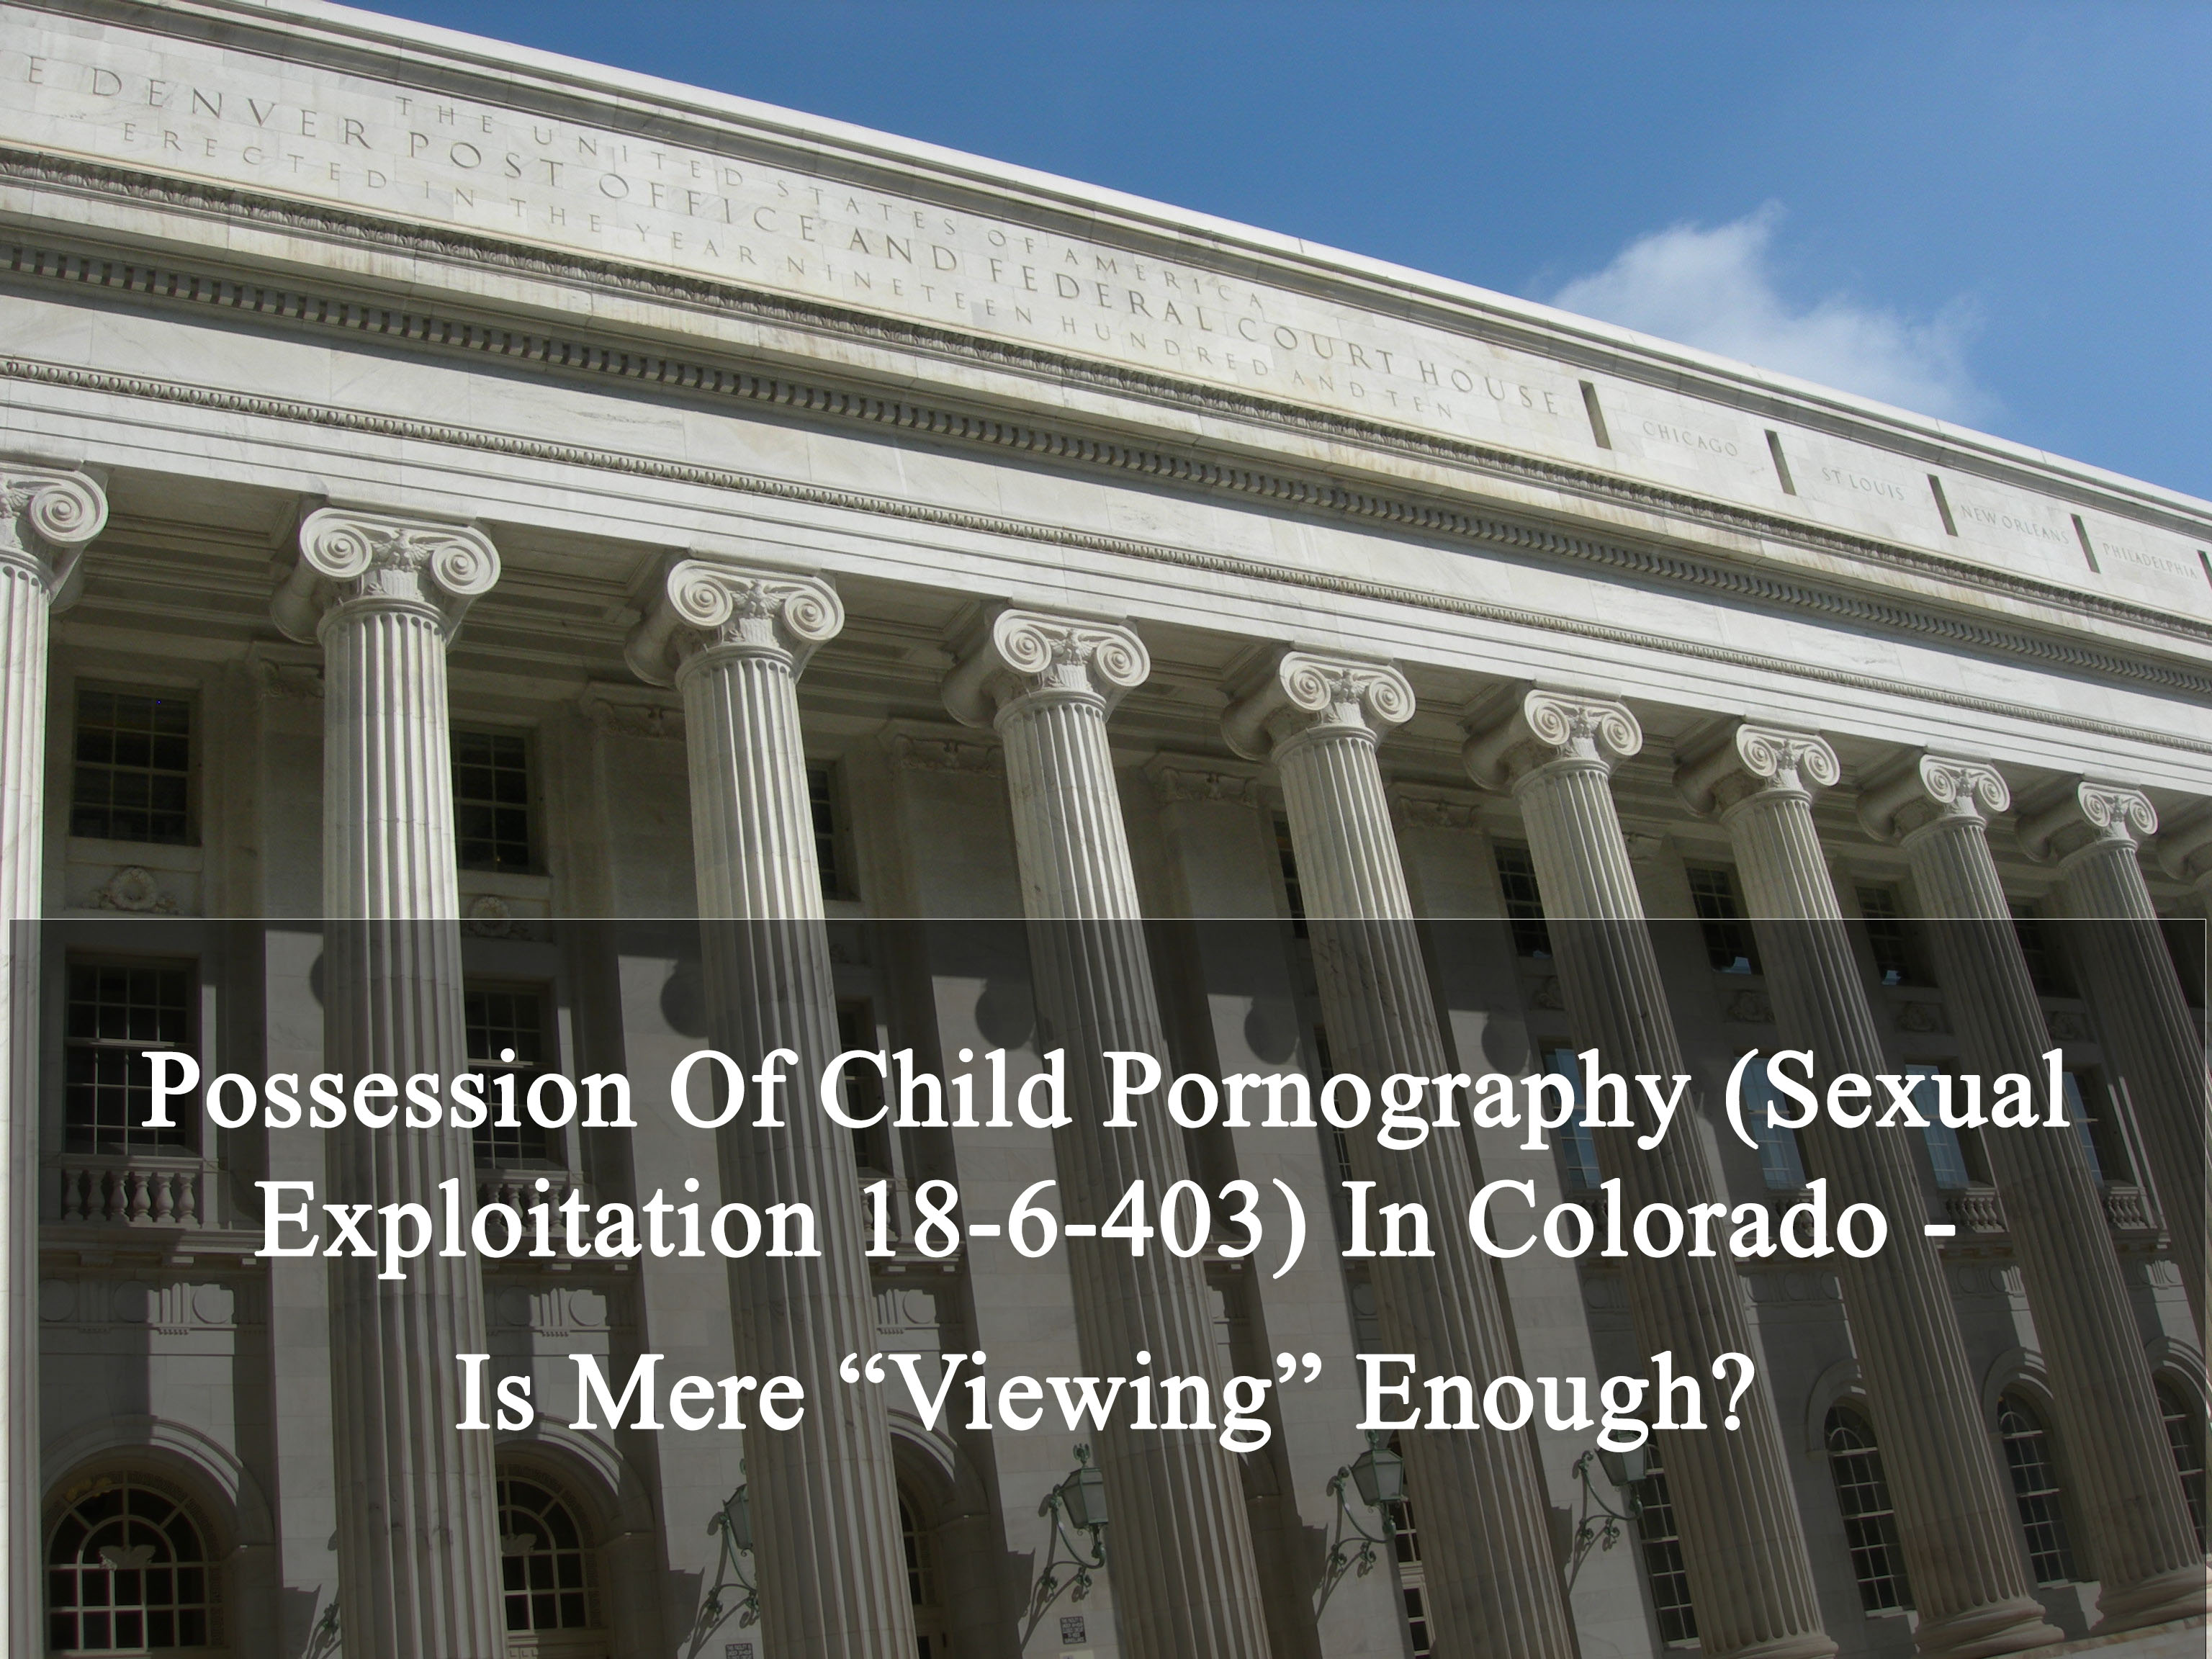 Possession Of Child Pornography (Sexual Exploitation 18-6-403) In Colorado - Is Mere Viewing Enough?